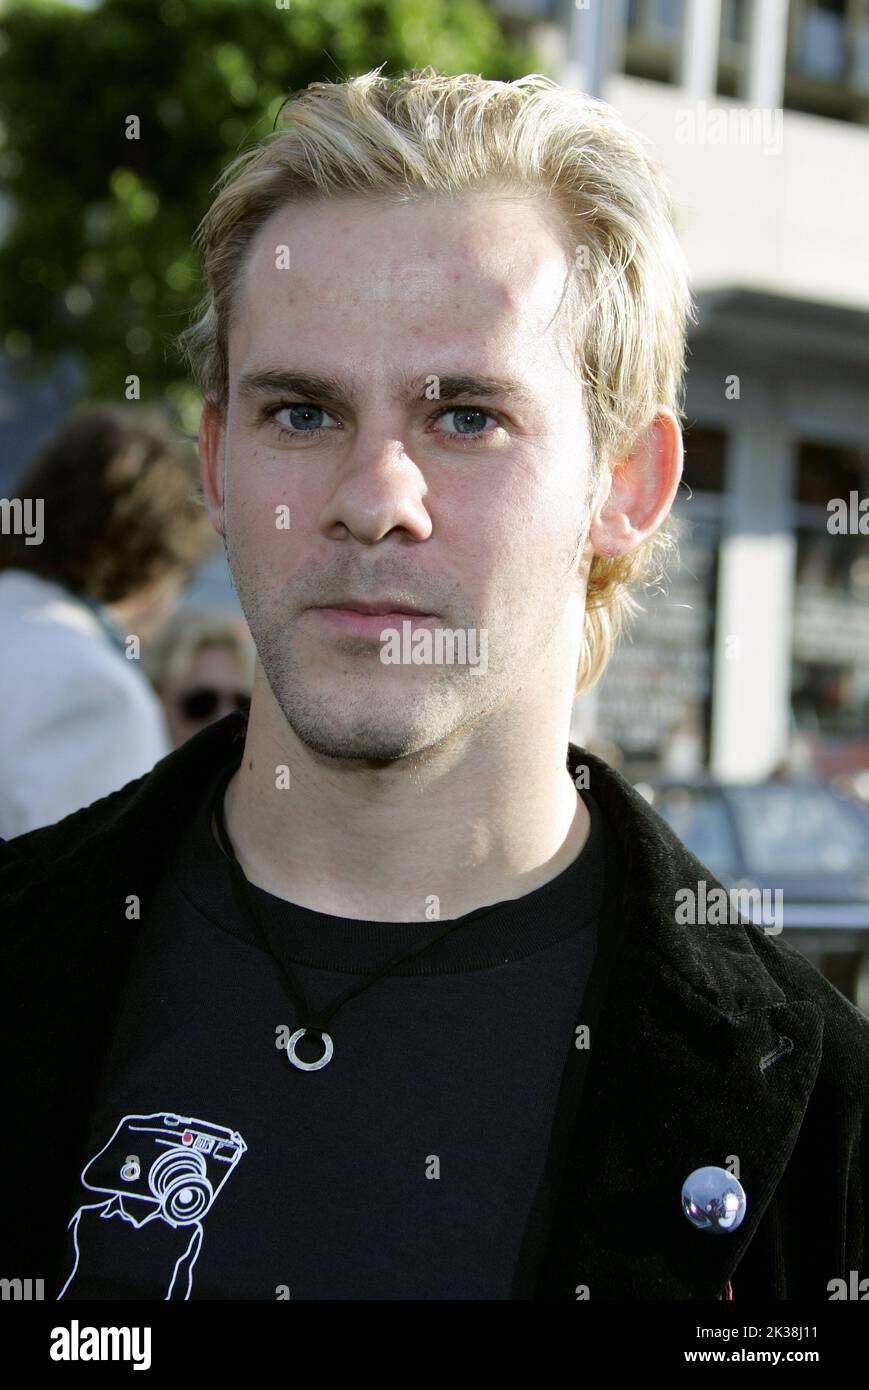 DOMINIC MONAGHAN ACTOR BATMAN BEGINS CHINESE THEATRE, HOLLYWOOD LOS ANGELES, USA 06/06/2005 LAM51578 Stock Photo